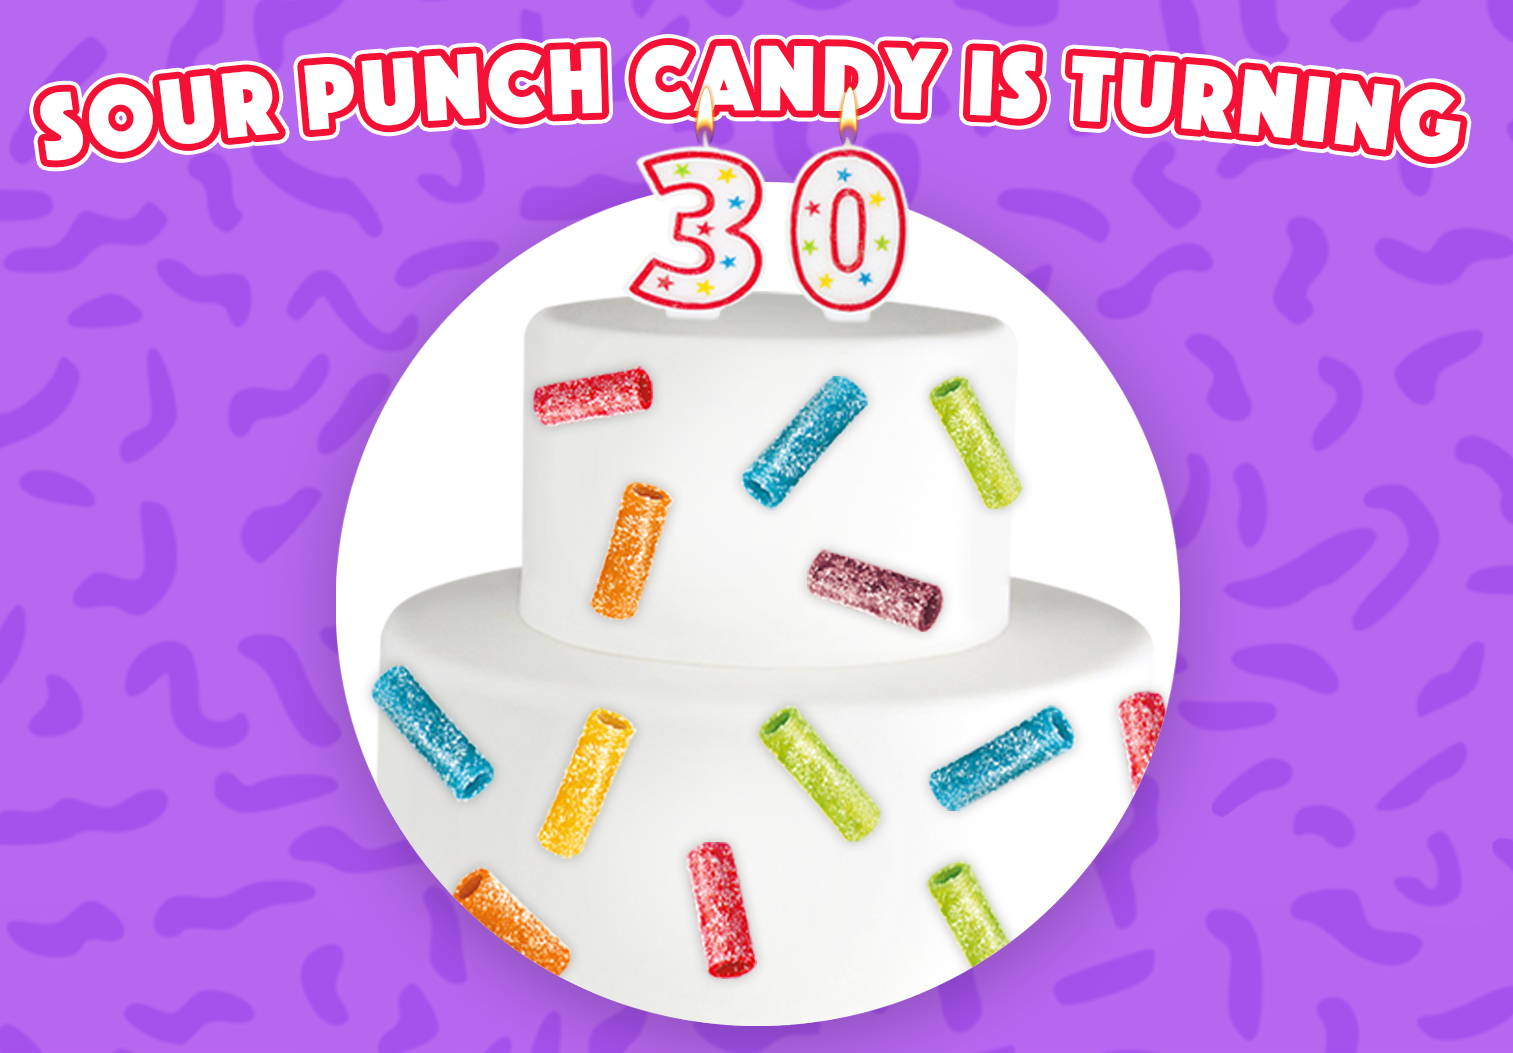 Sour Punch is turning 30